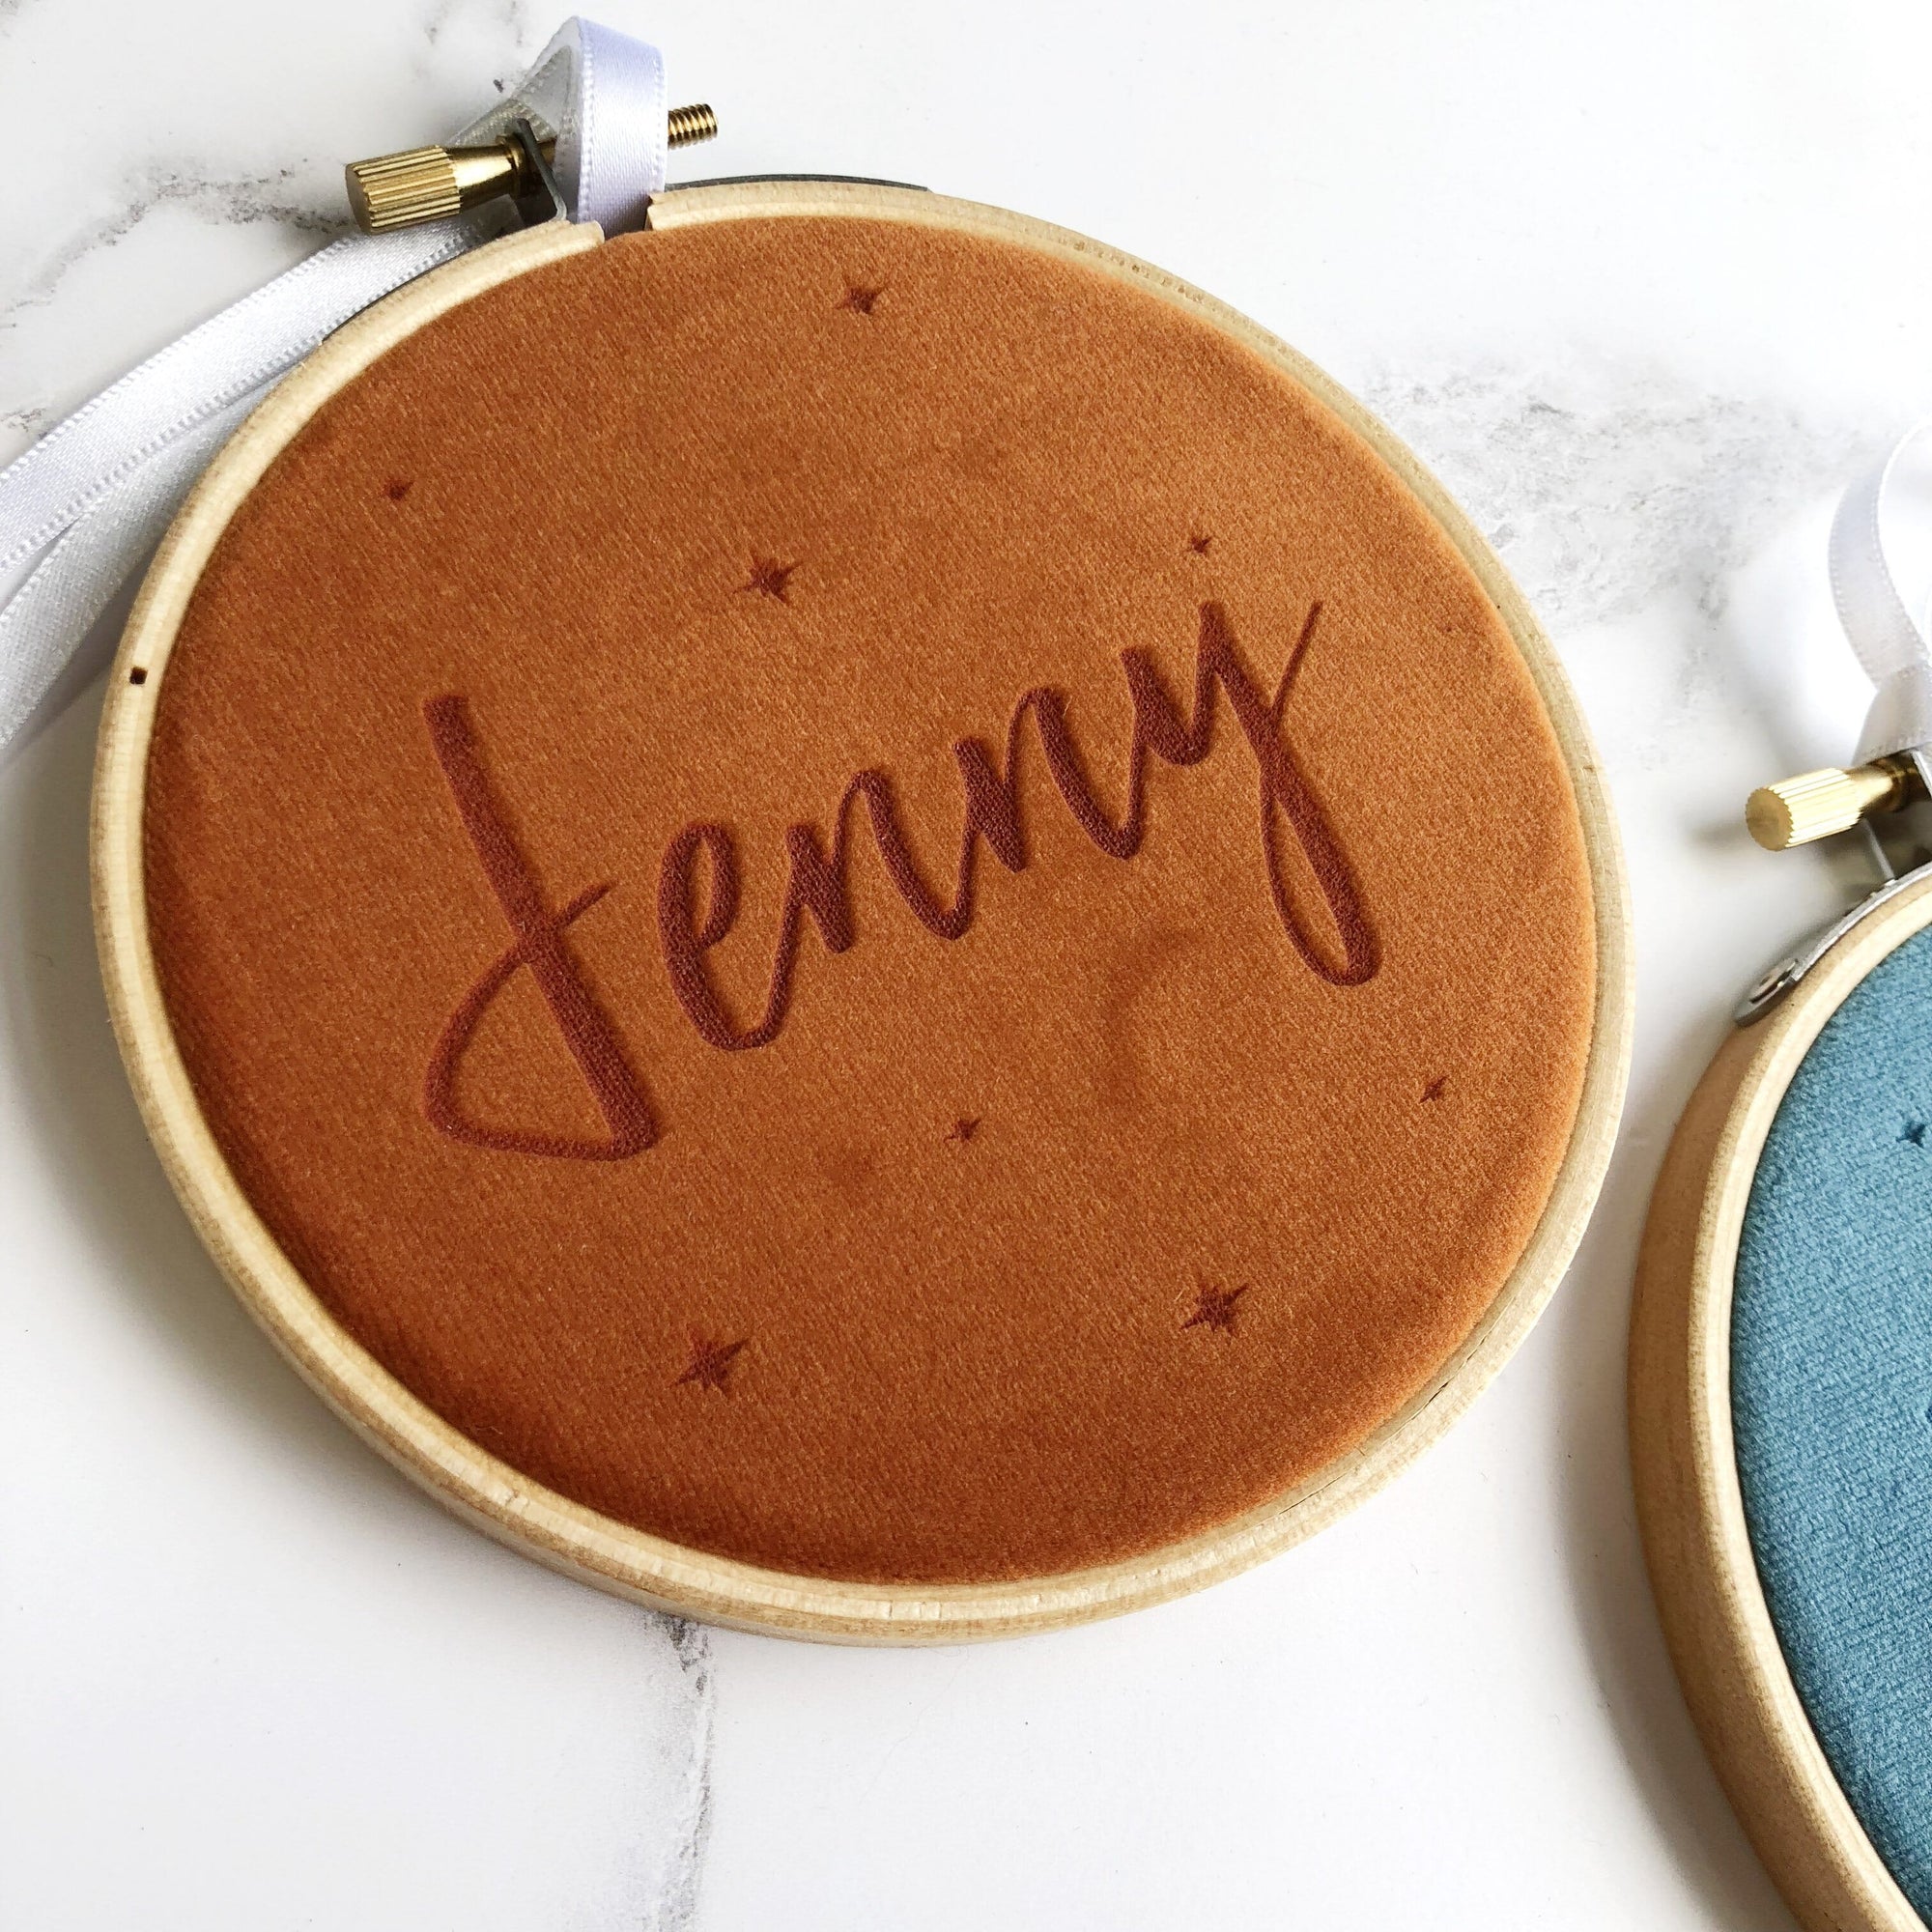 Velvet fabric in an embroidery hoop engraved with a name